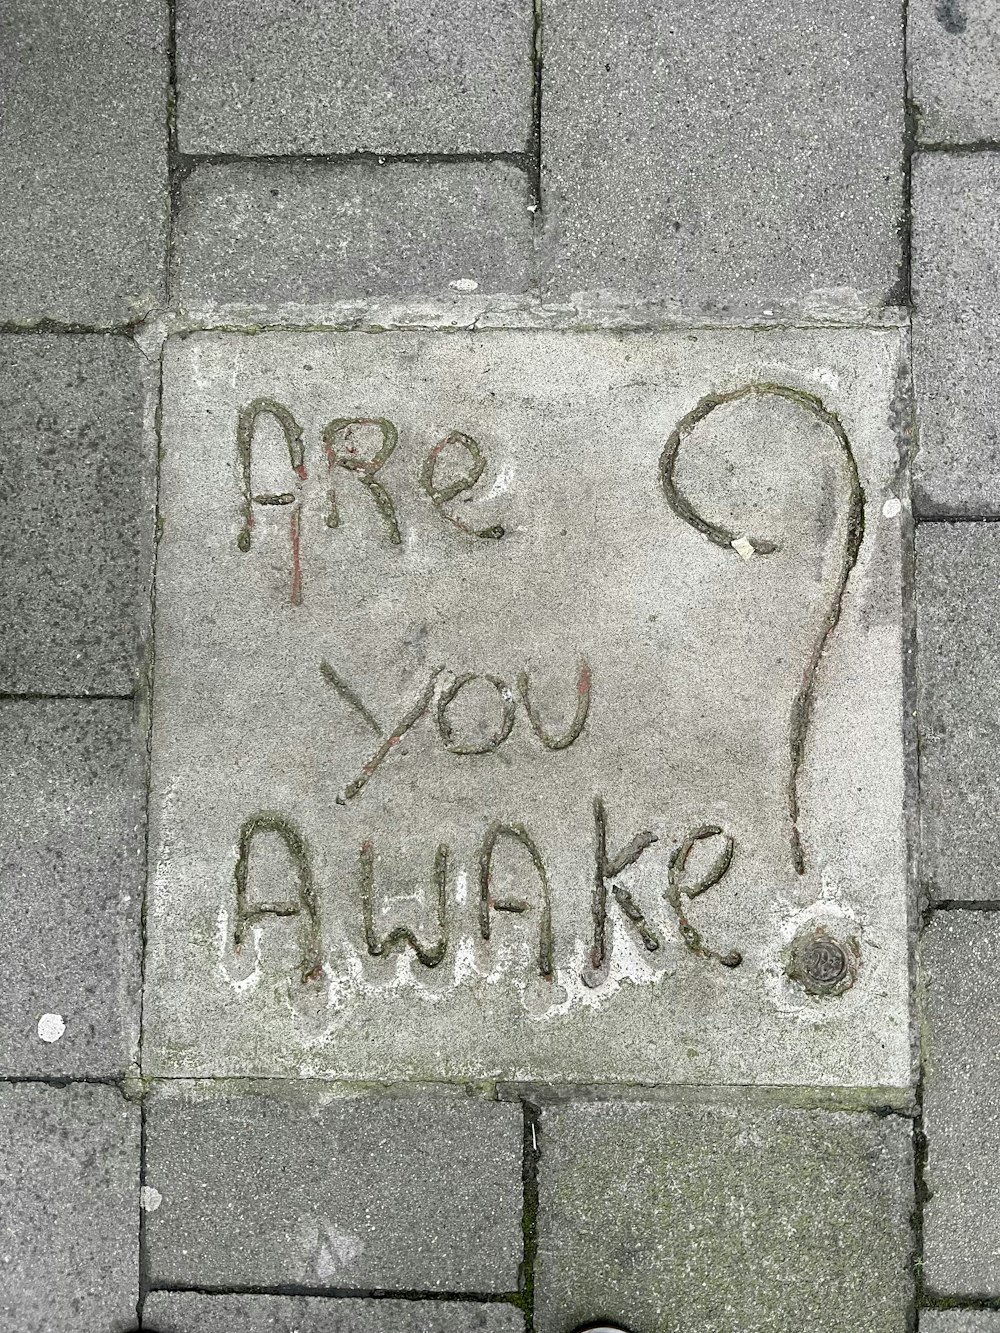 a sidewalk with a sign that says are you awake